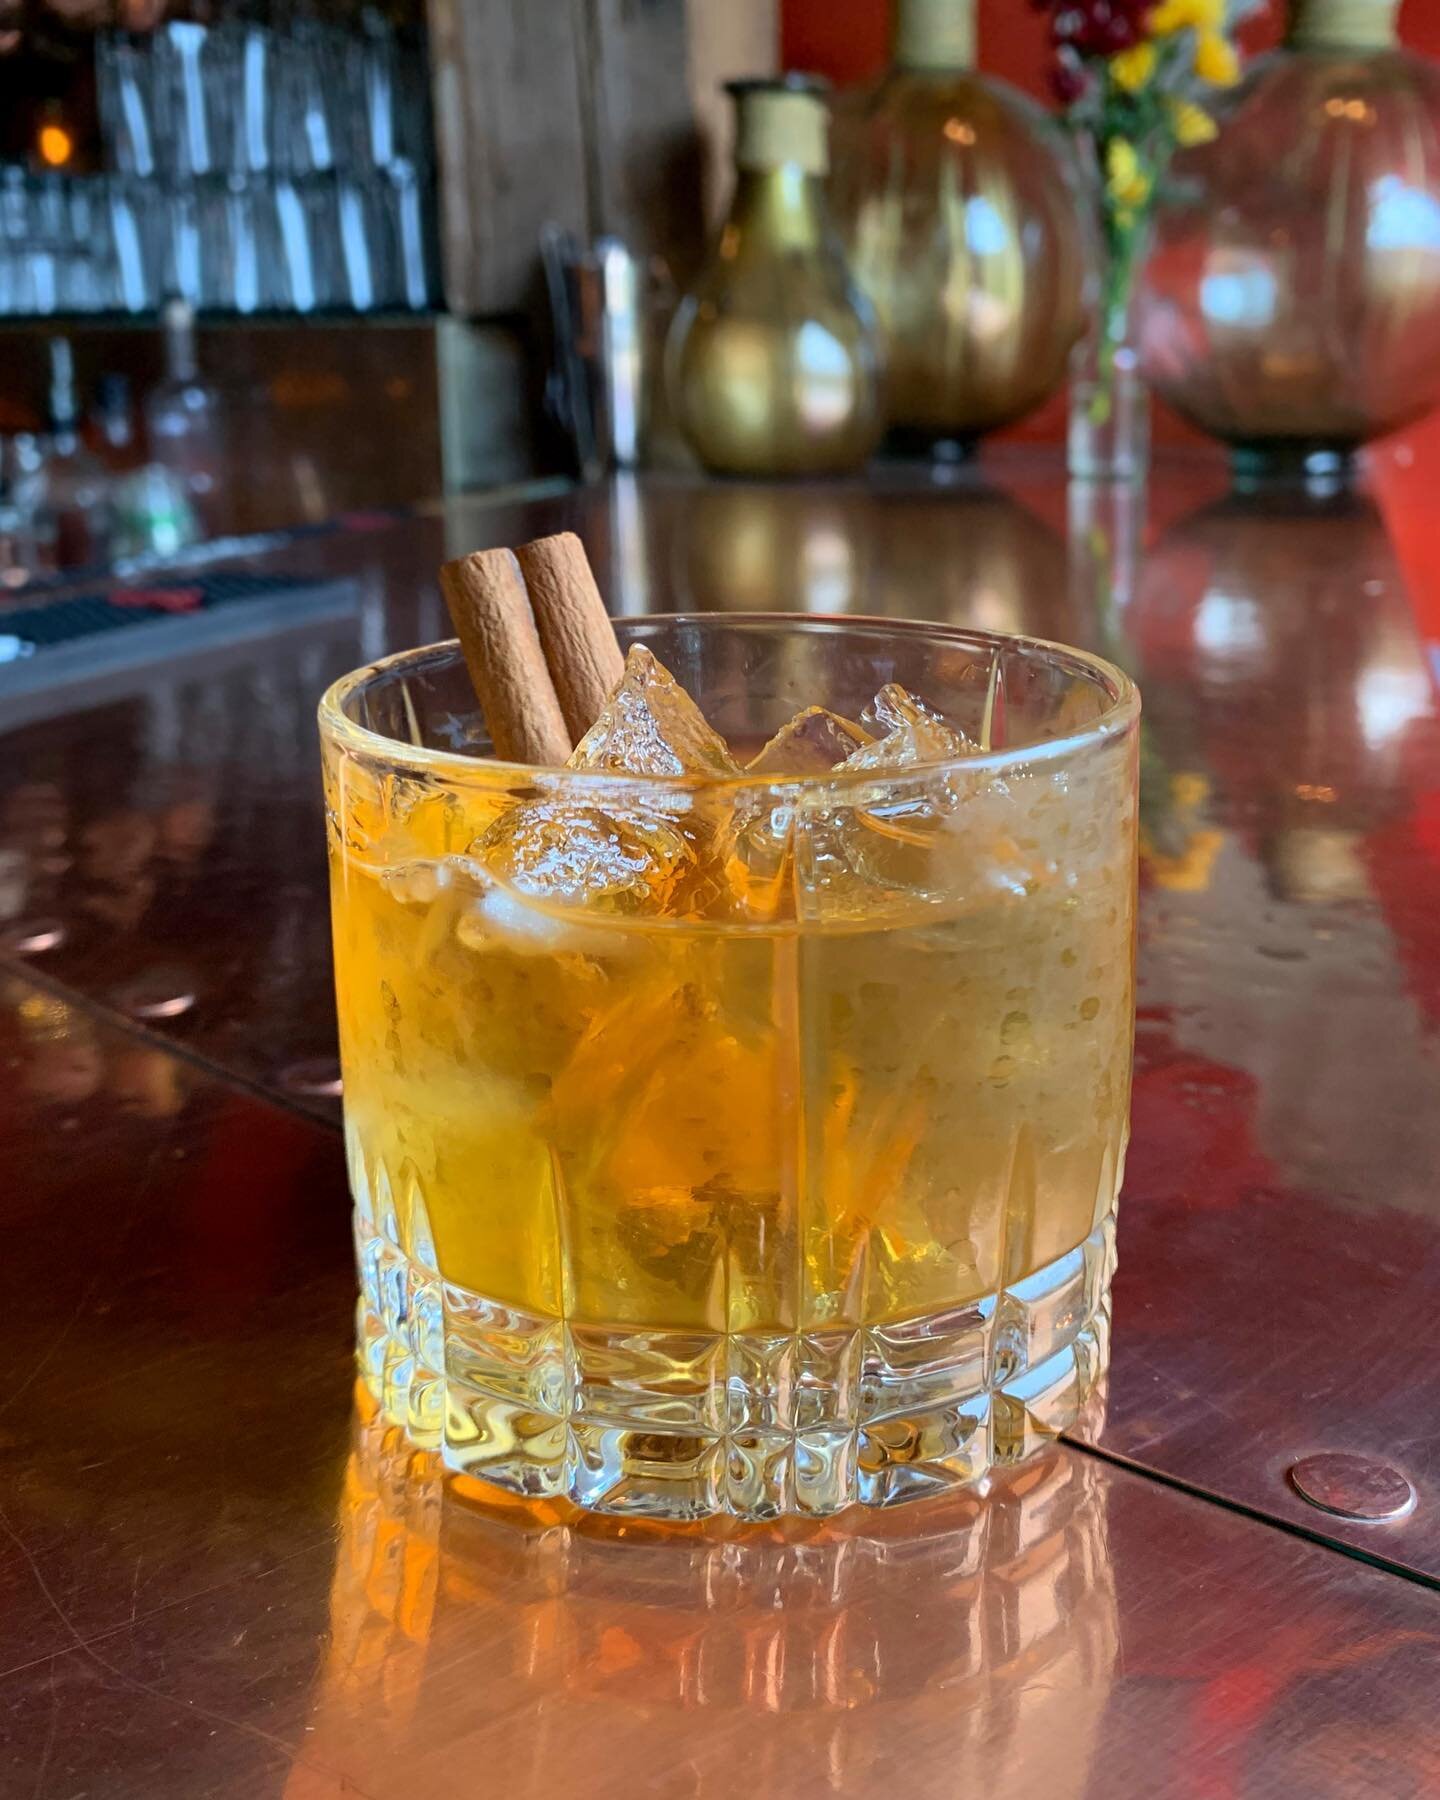 Our Cinnamon Apple Whiskey is back! Enjoy Fall and swing by our Cocktail Lounge to enjoy this beauty. Our Cocktail Lounge is now open 7 Days a Week 🥃🍂
-
#valentinedistilling #mayorpingree #cleanandgreen #regionalmanufacturing #whiskey #cocktails #m